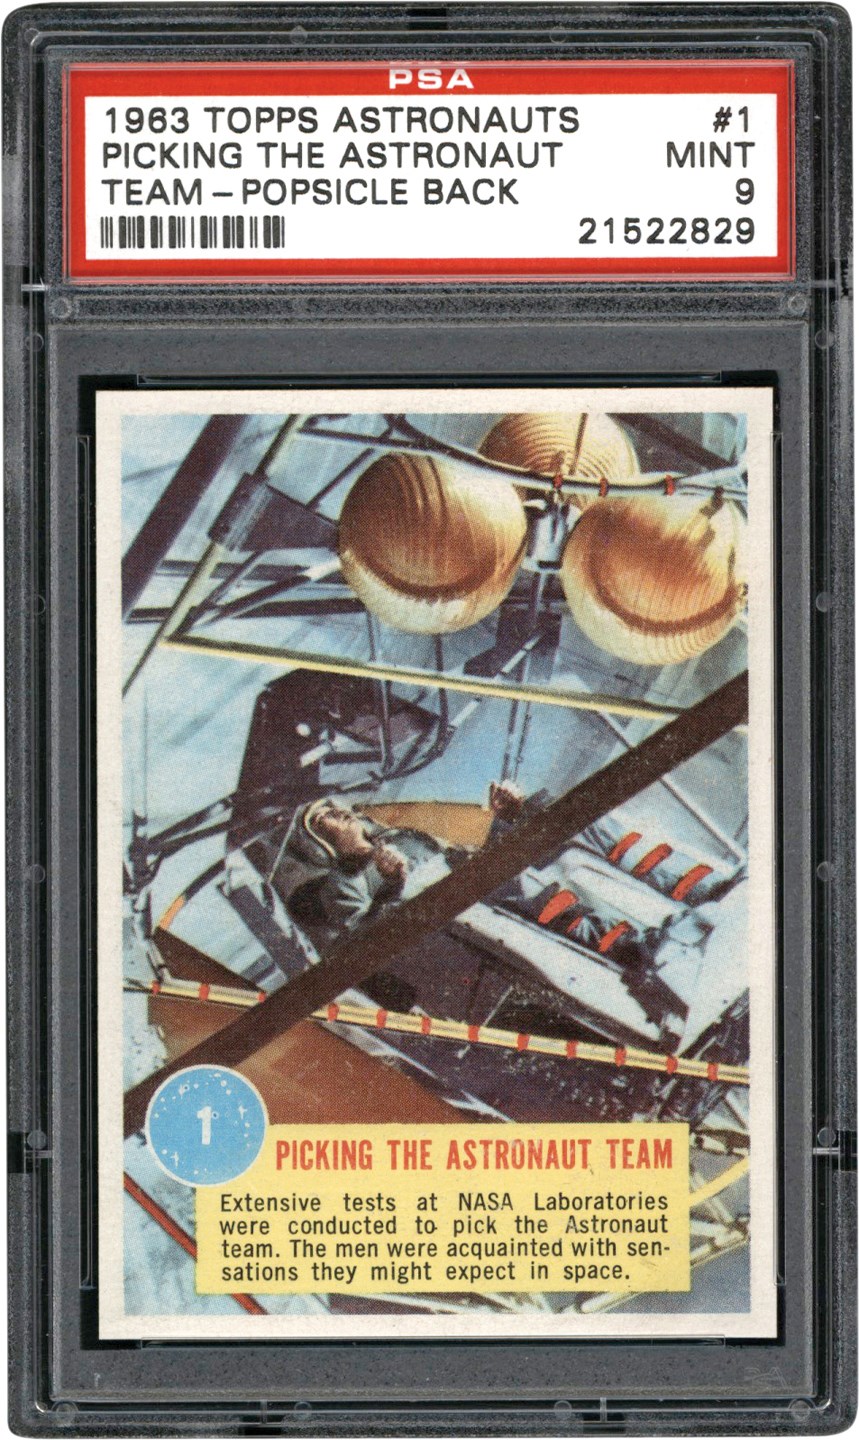 Non-Sports Cards - 1963 Topps Astronauts #1 Picking The Astronauts w/Popsicle Back PSA MINT 9 (Pop 2)